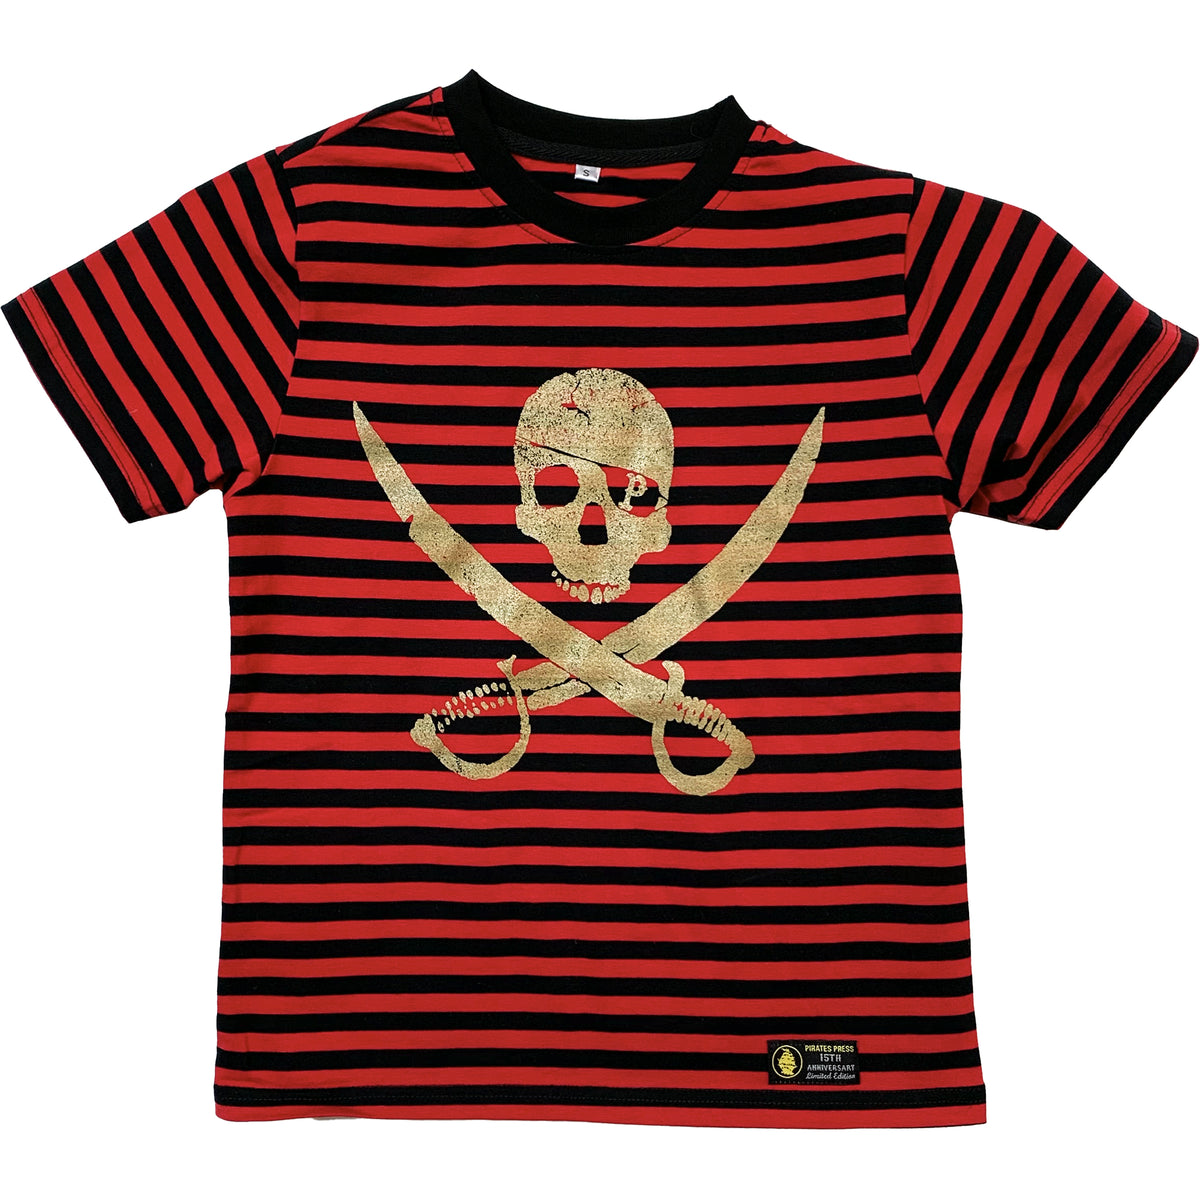 Pirates Press Records - Pirate Logo - Gold on Red &amp; Black Striped  - 15 Year Tag - T-Shirt - Youth